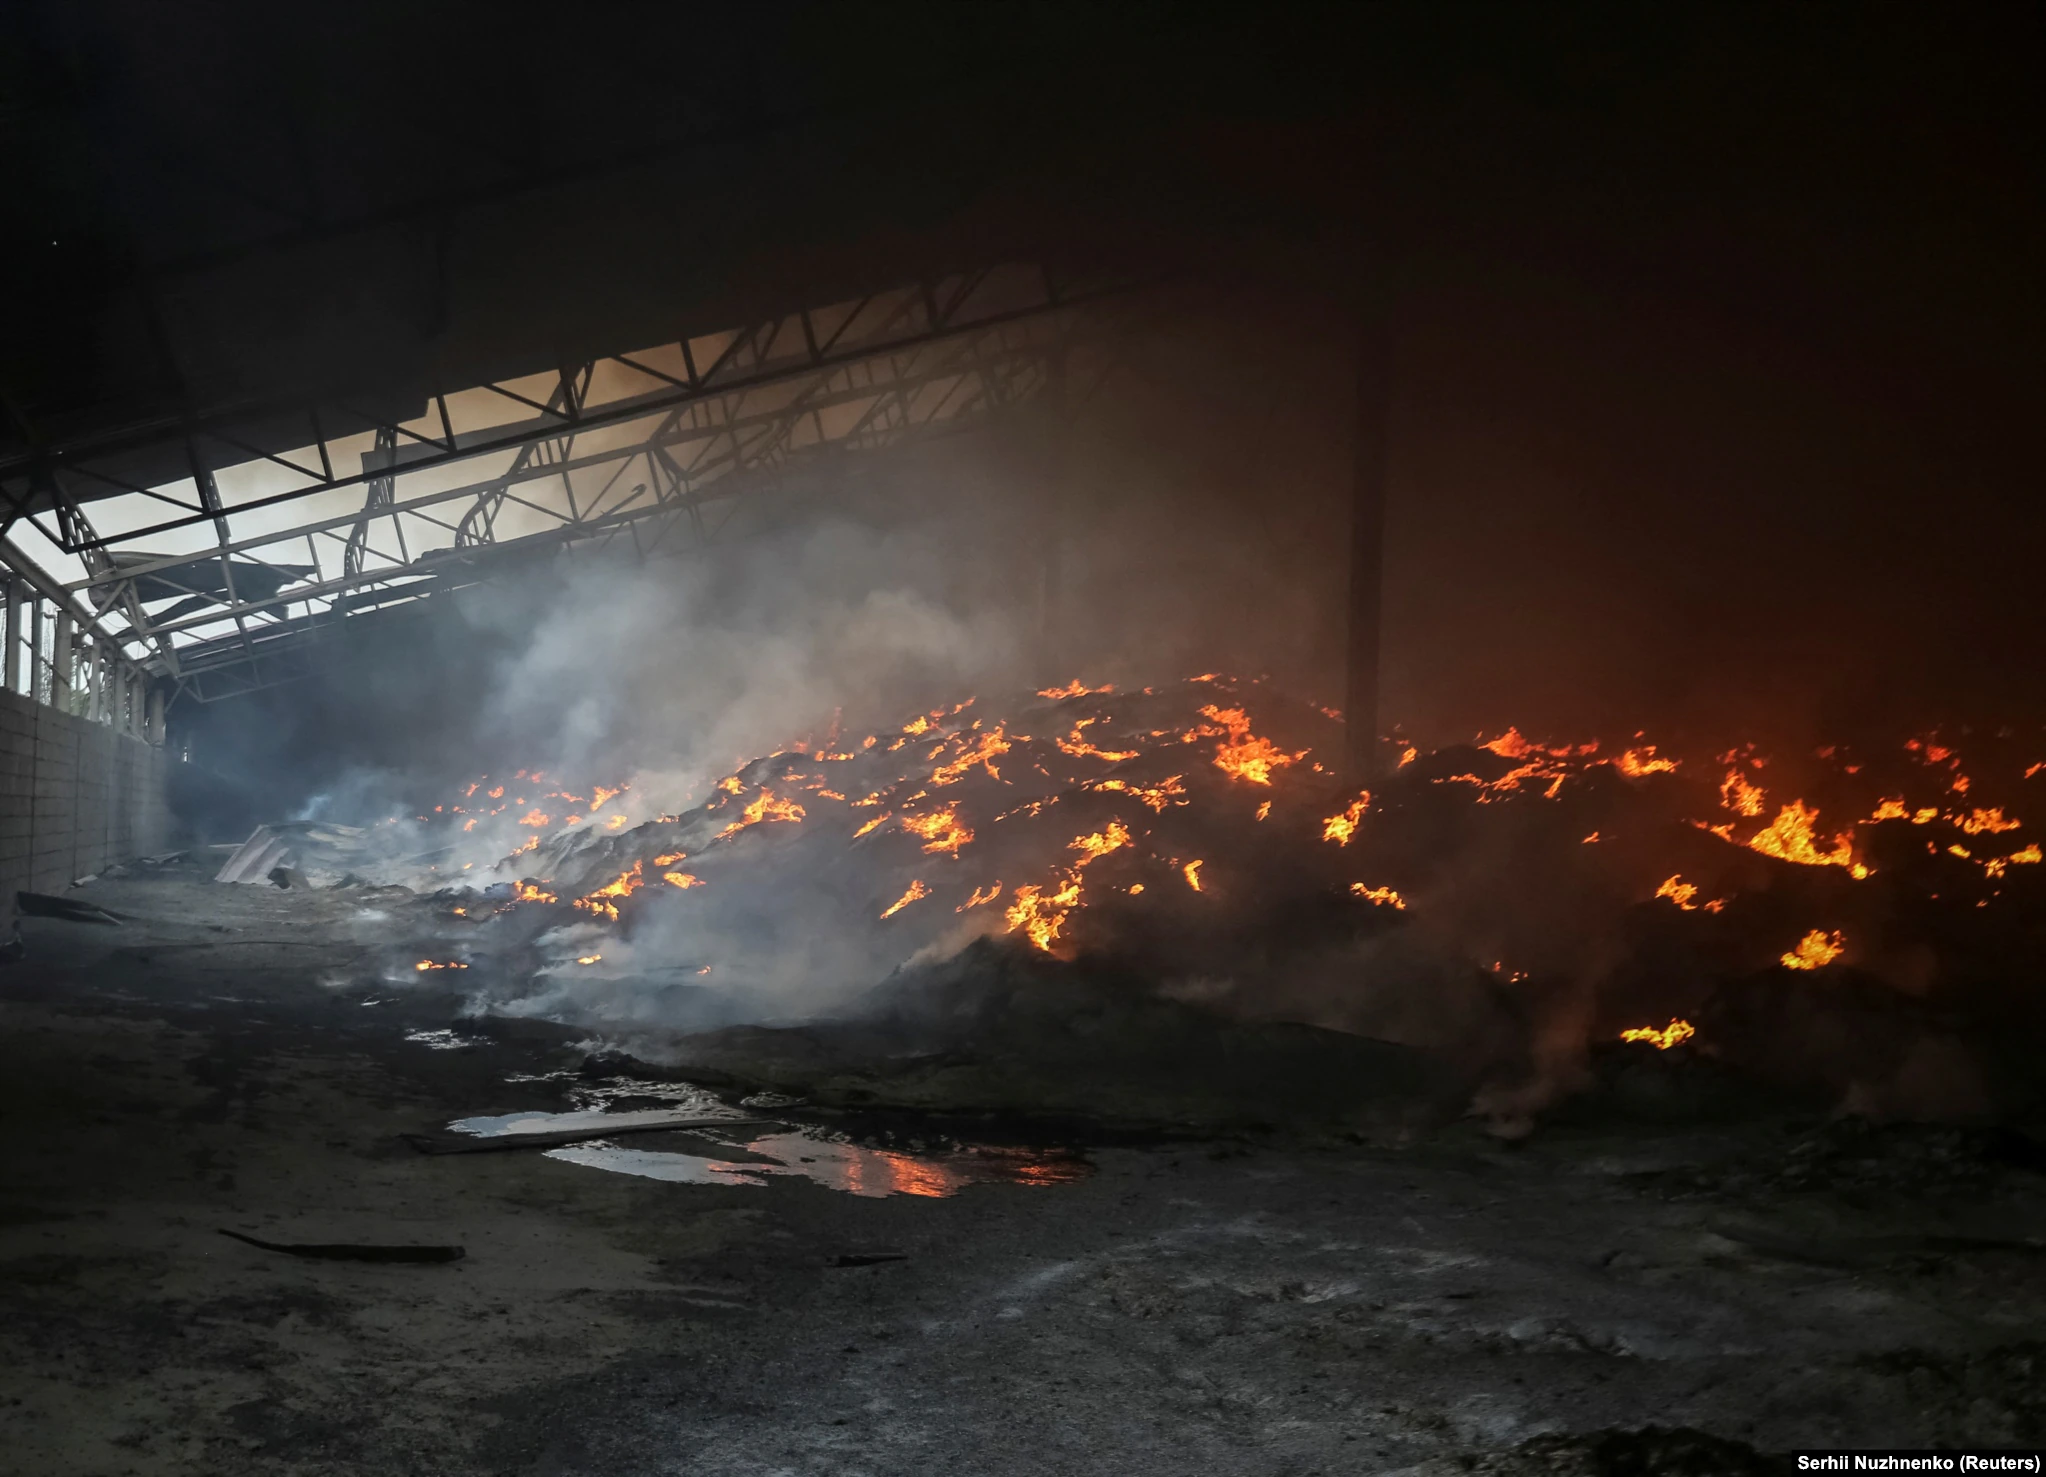 Russian forces have been accused of deliberately targeting food infrastructure in Ukraine. RFE/RL journalists witnessed this storage facility for sunflower seeds burning on 31 May 2022. Ukrainian soldiers claimed the warehouse had been singled out for an artillery strike. Photo: Serhil Nuzhnenko / Reuters